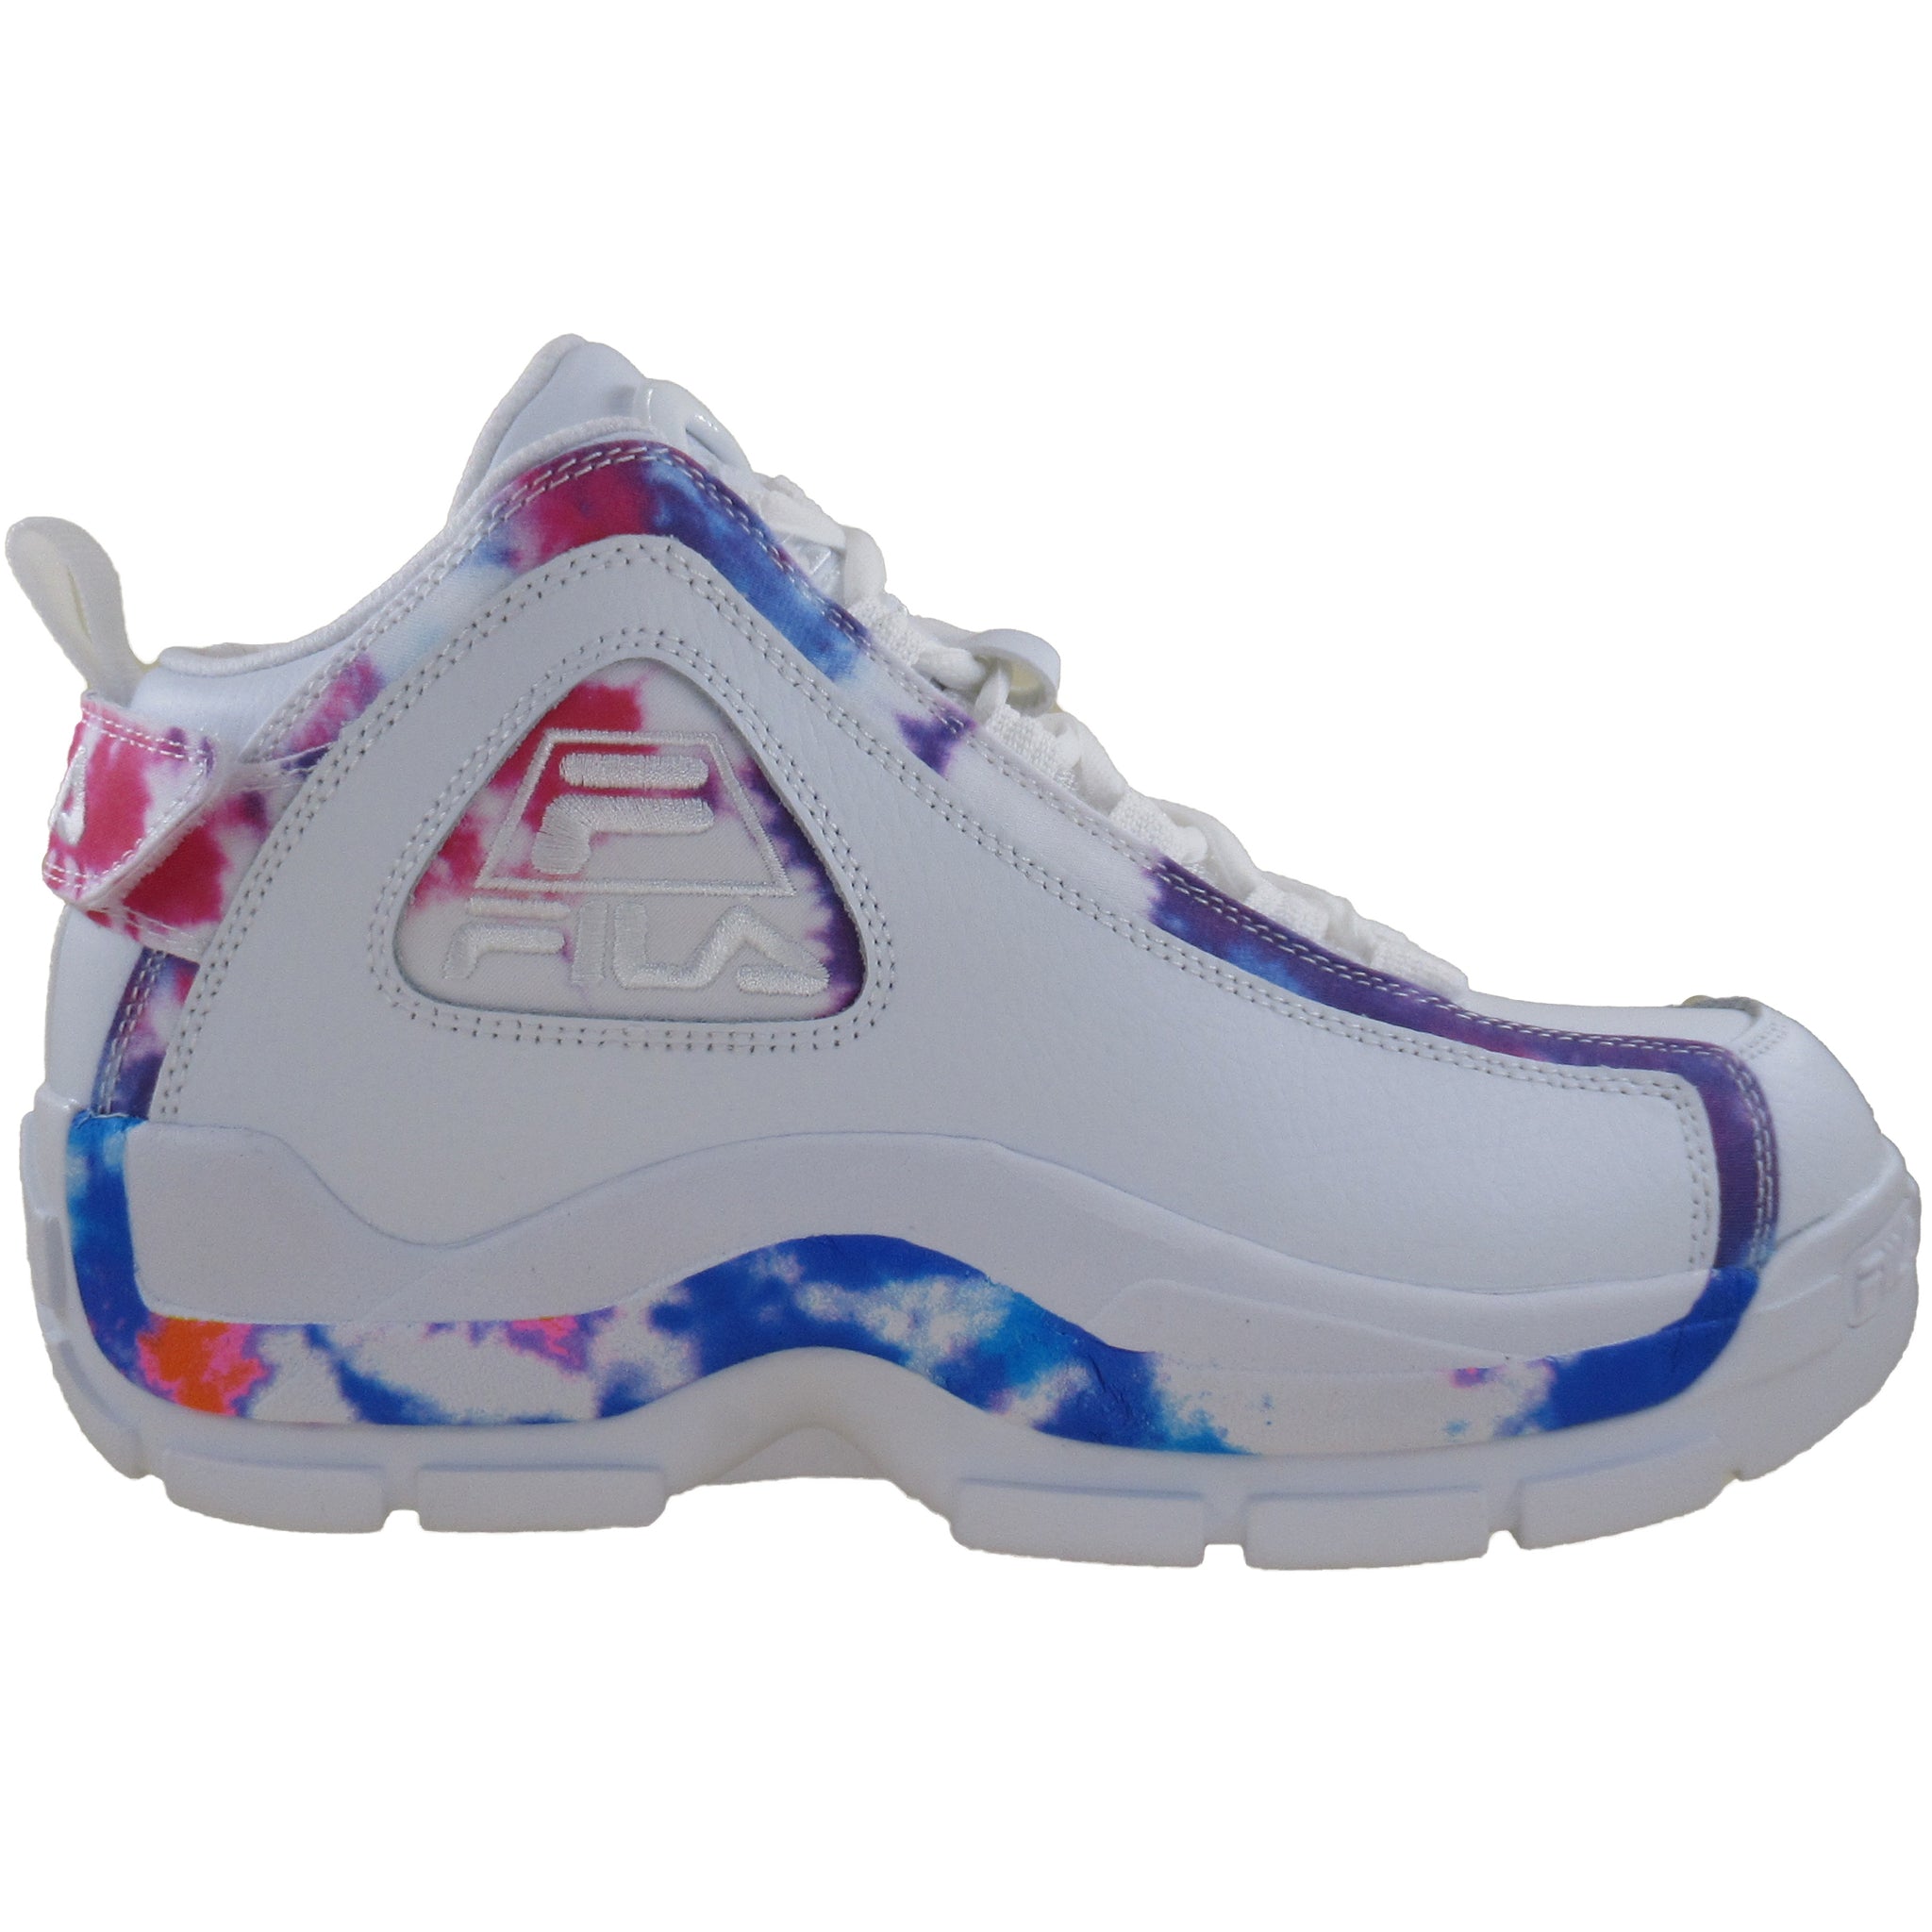 Fila Grant Hill Tie Dye Casual Retro Basketball Shoes 1BM01234 – That Shoe Store and More